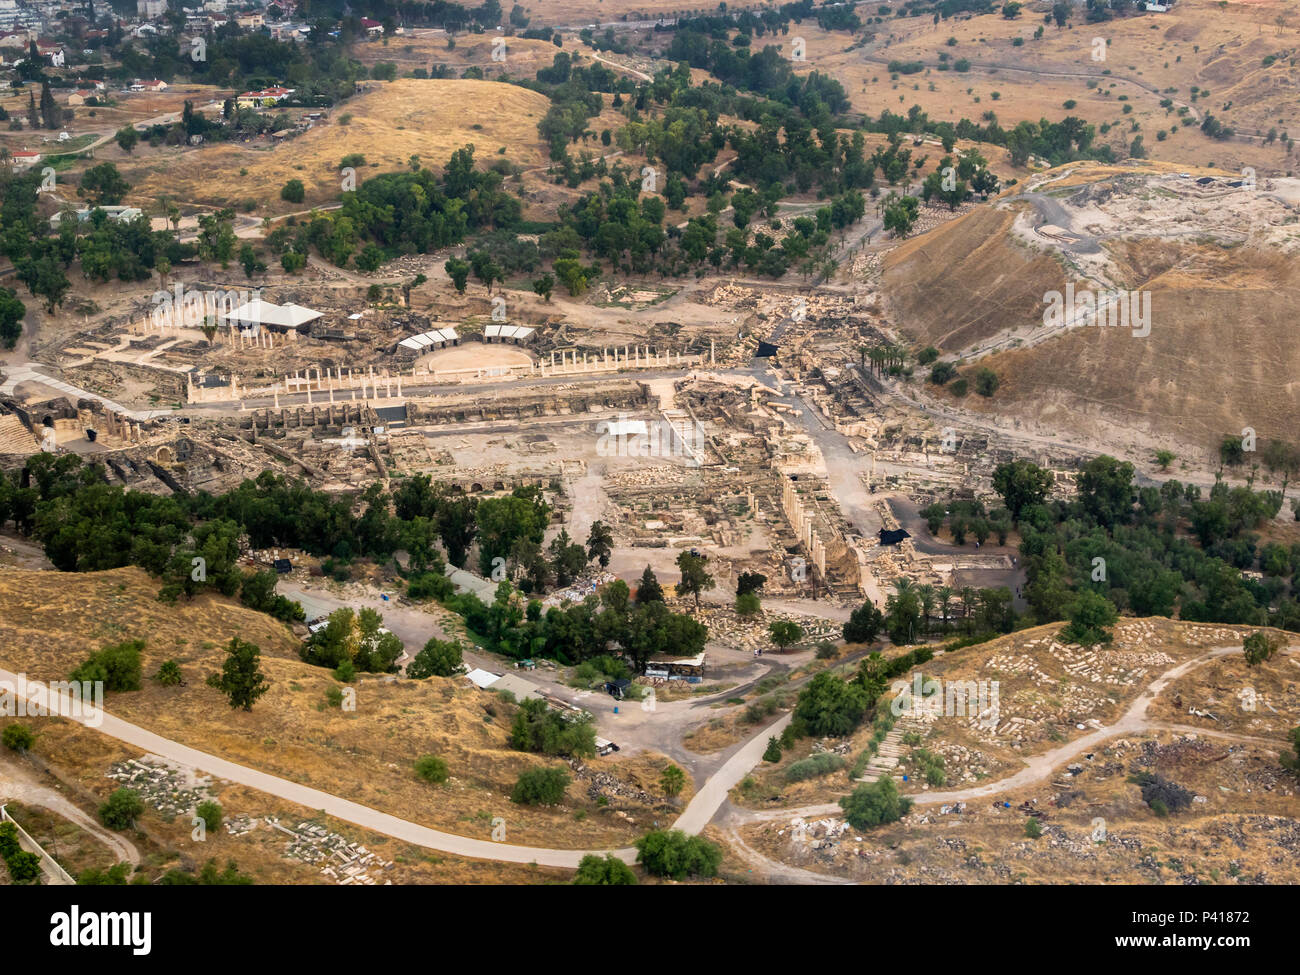 Archaelogic excavations of Roman settlement at Bet Shean, northern Israel, aerial view Stock Photo